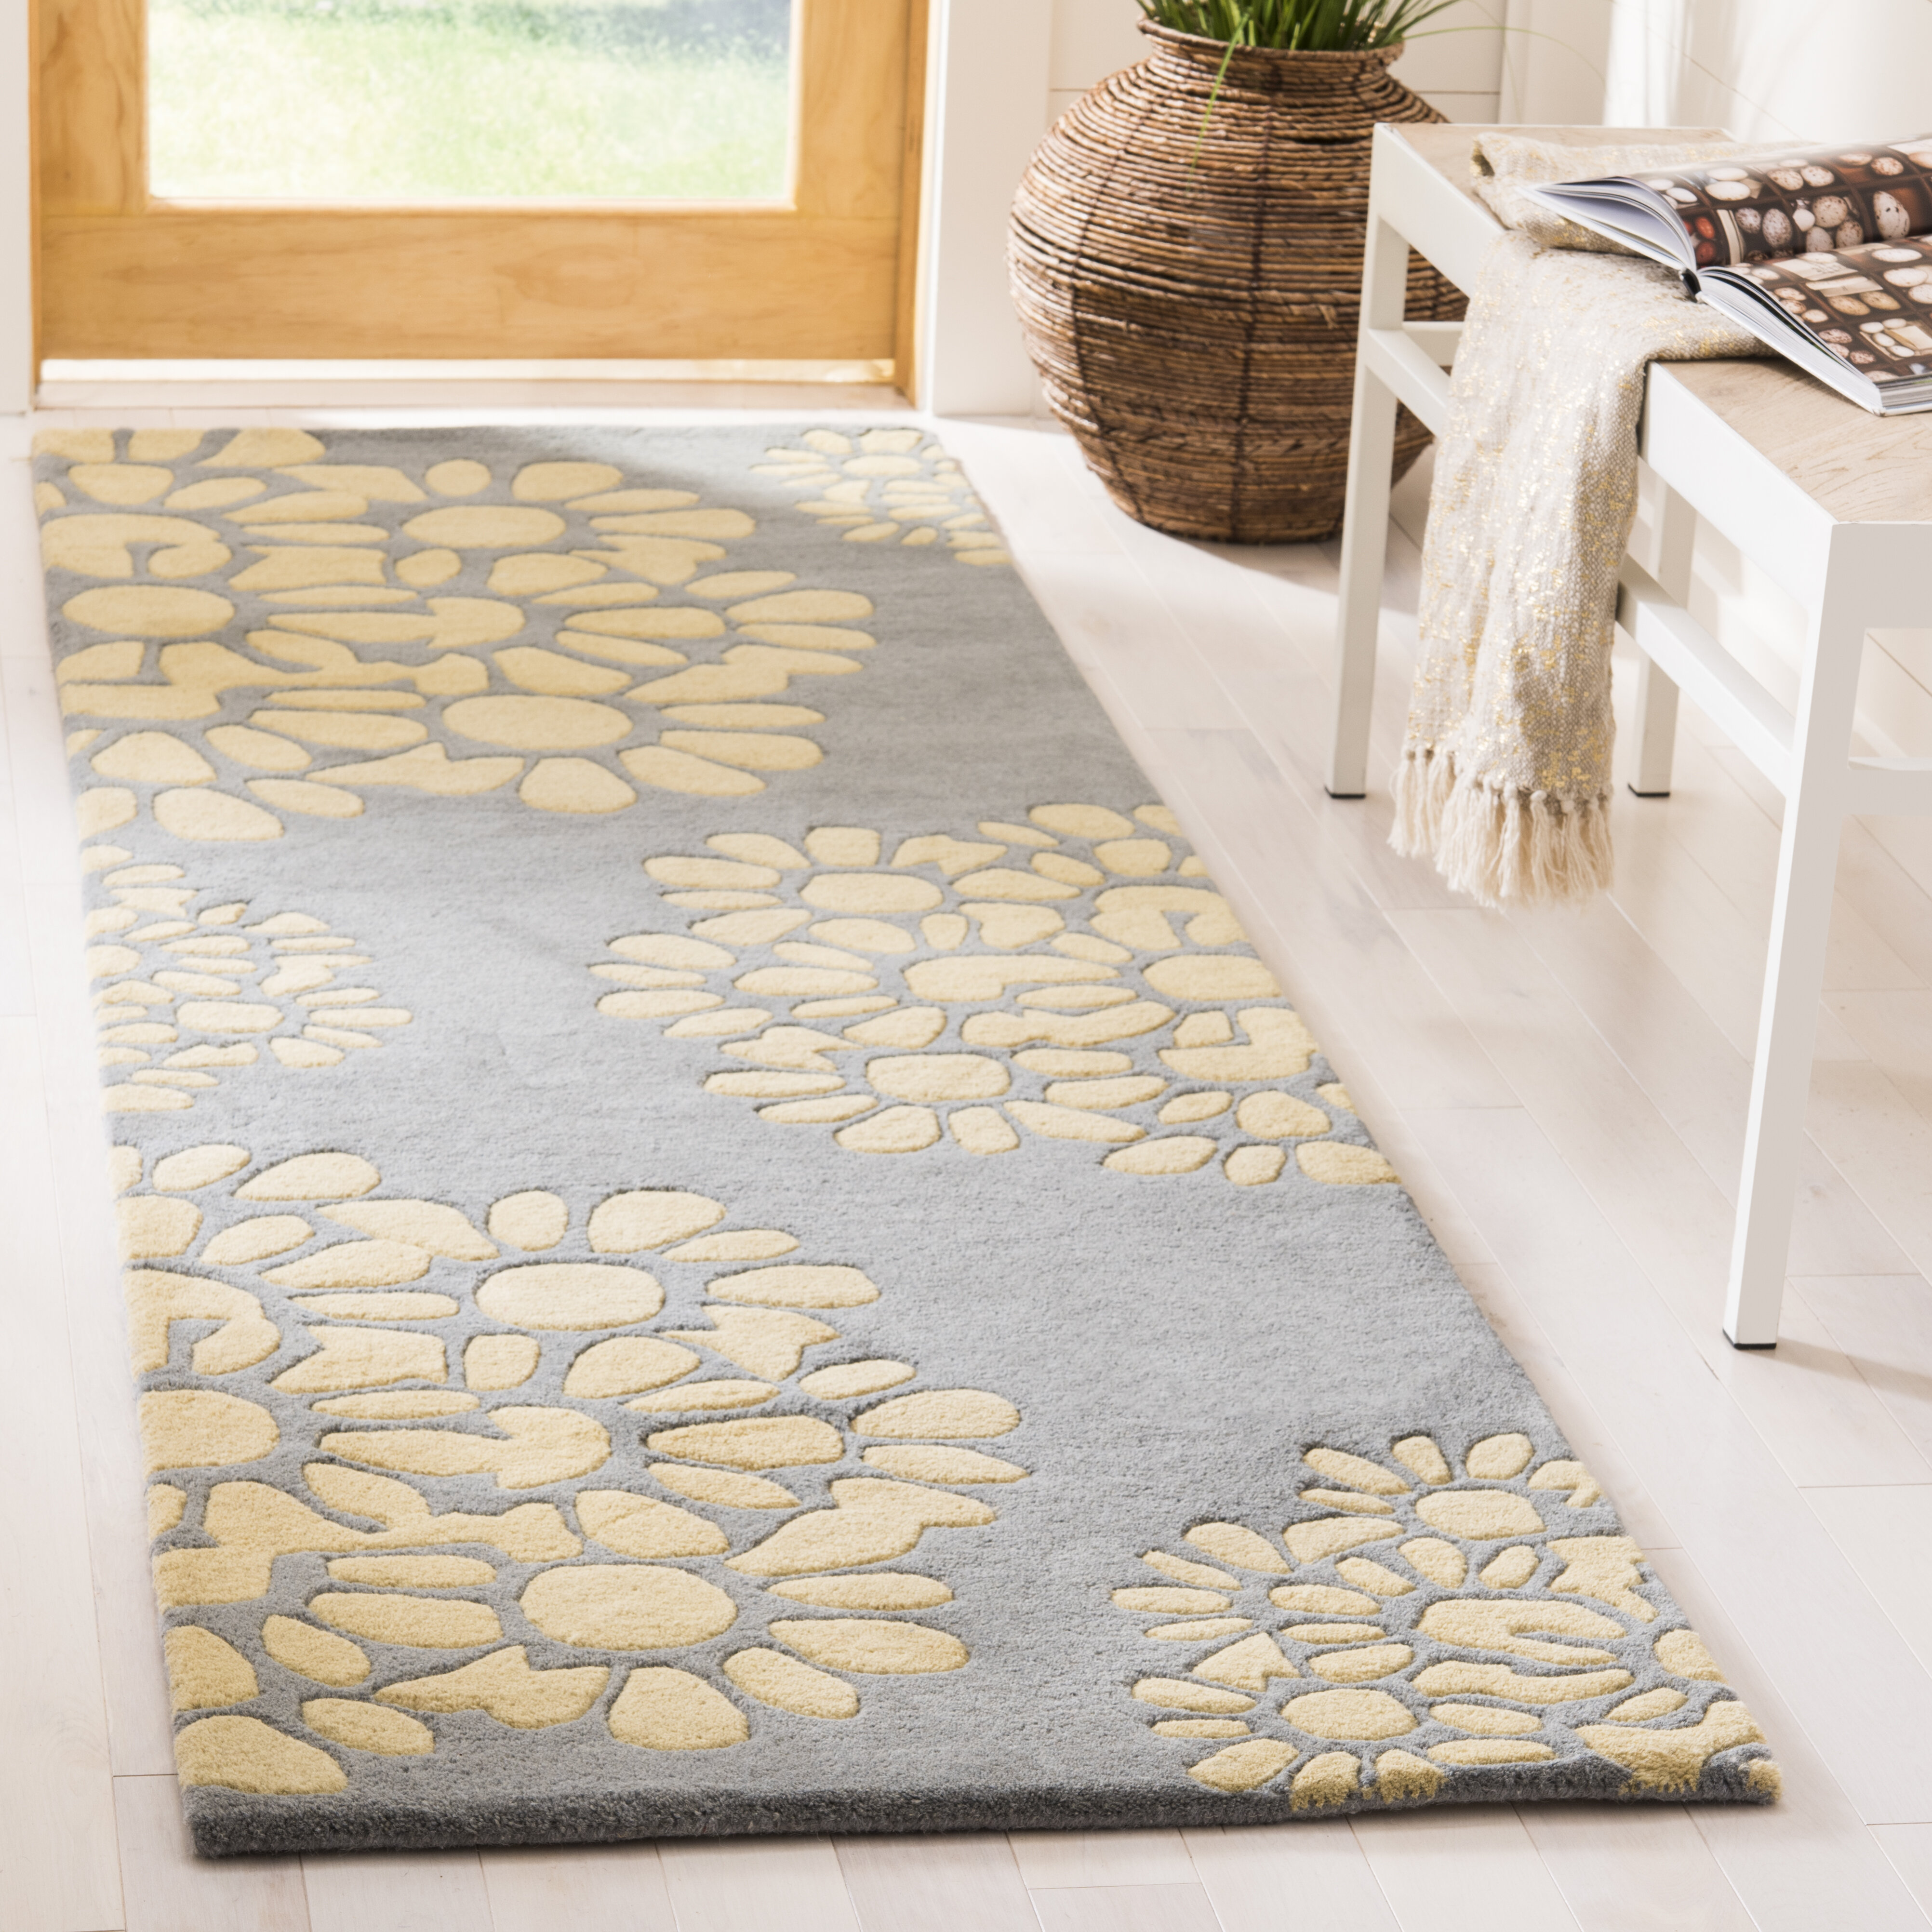 Martha Stewart Hand Tufted Cotton Gray Yellow Area Rug Reviews